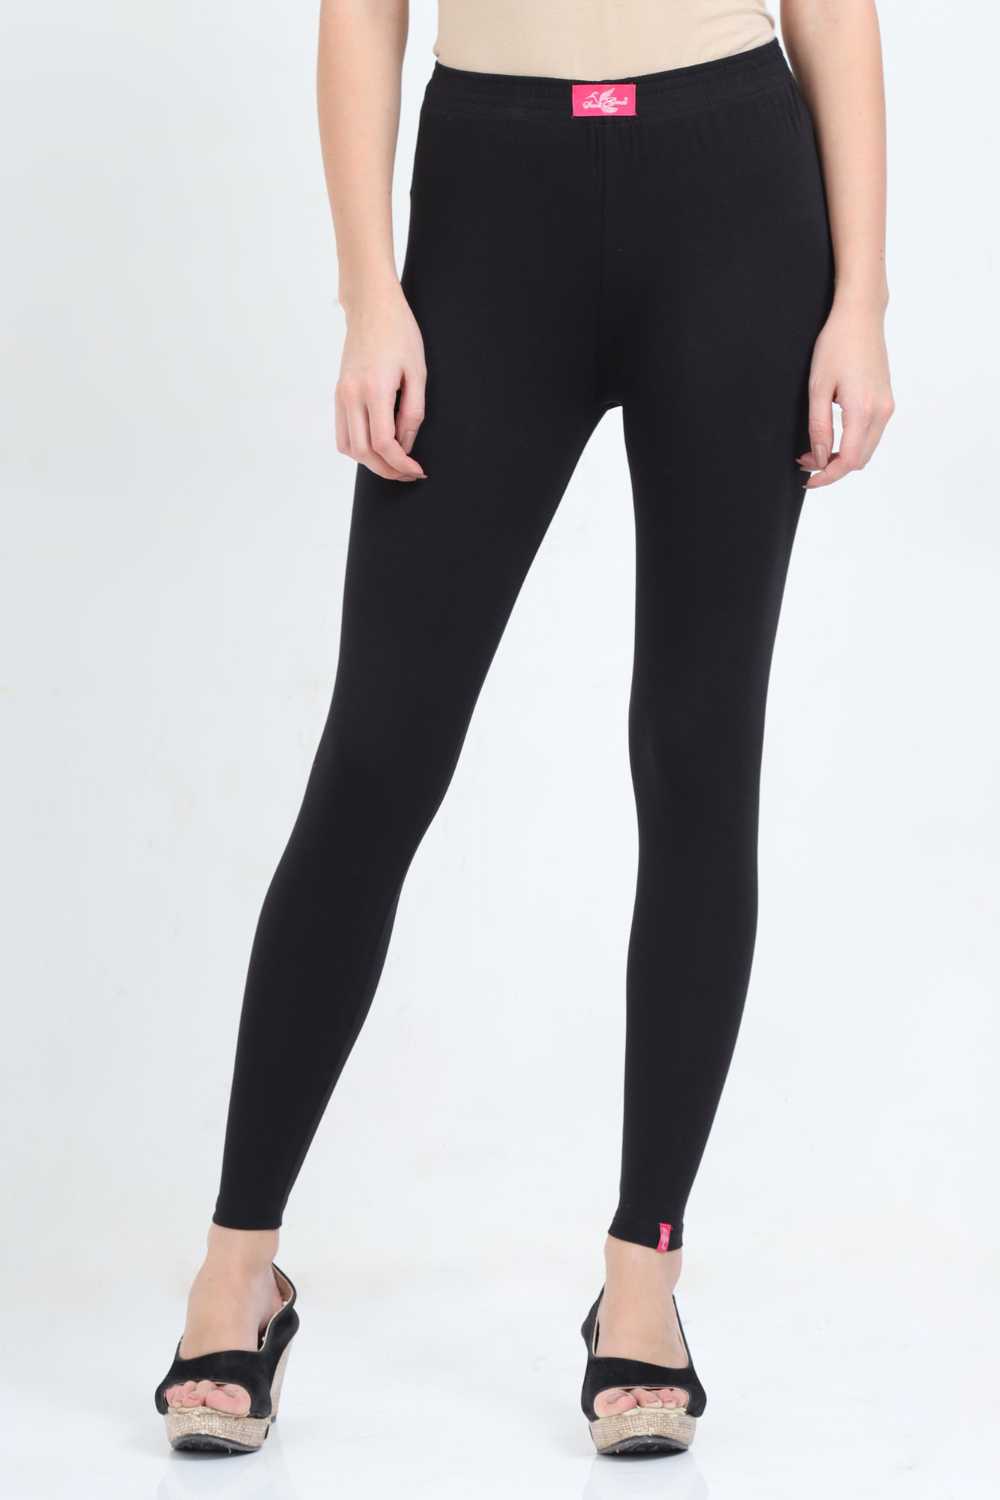 Black and White Ladies Lycra Cotton Legging at Rs.120/Piece in tiruppur  offer by ESS ARR Kay Garments